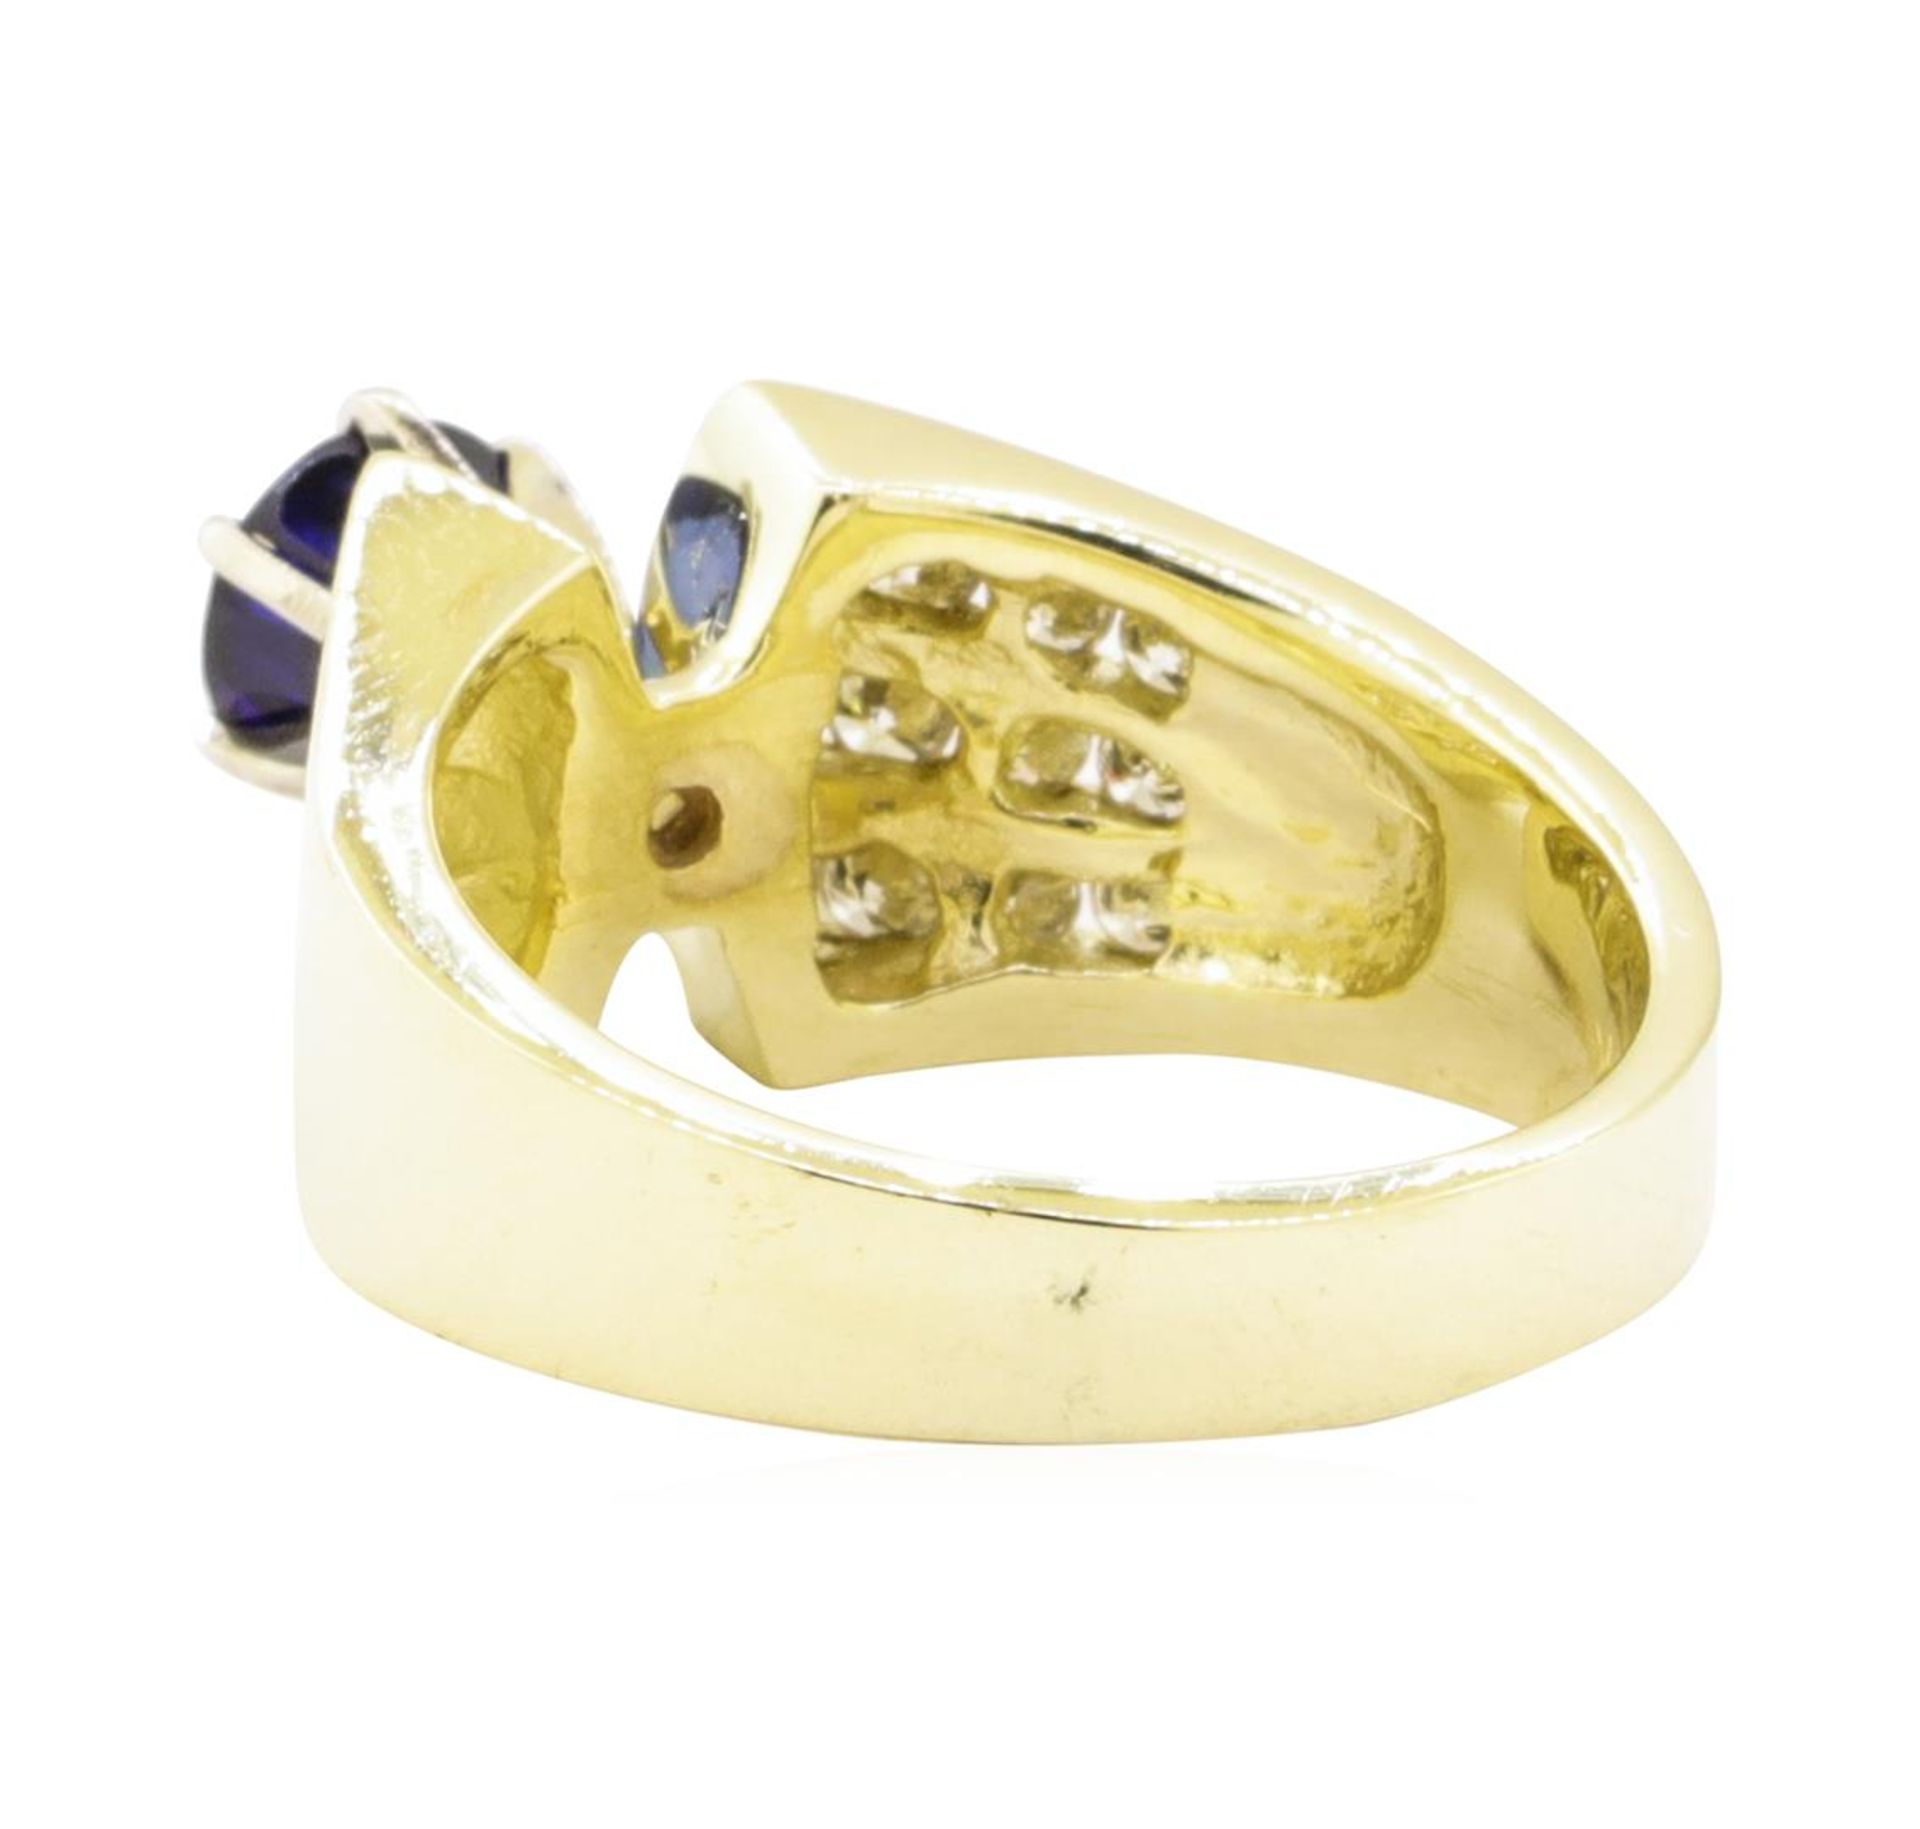 1.65 ctw Blue Sapphire And Diamond Ring - 14KT Yellow Gold - Image 3 of 5